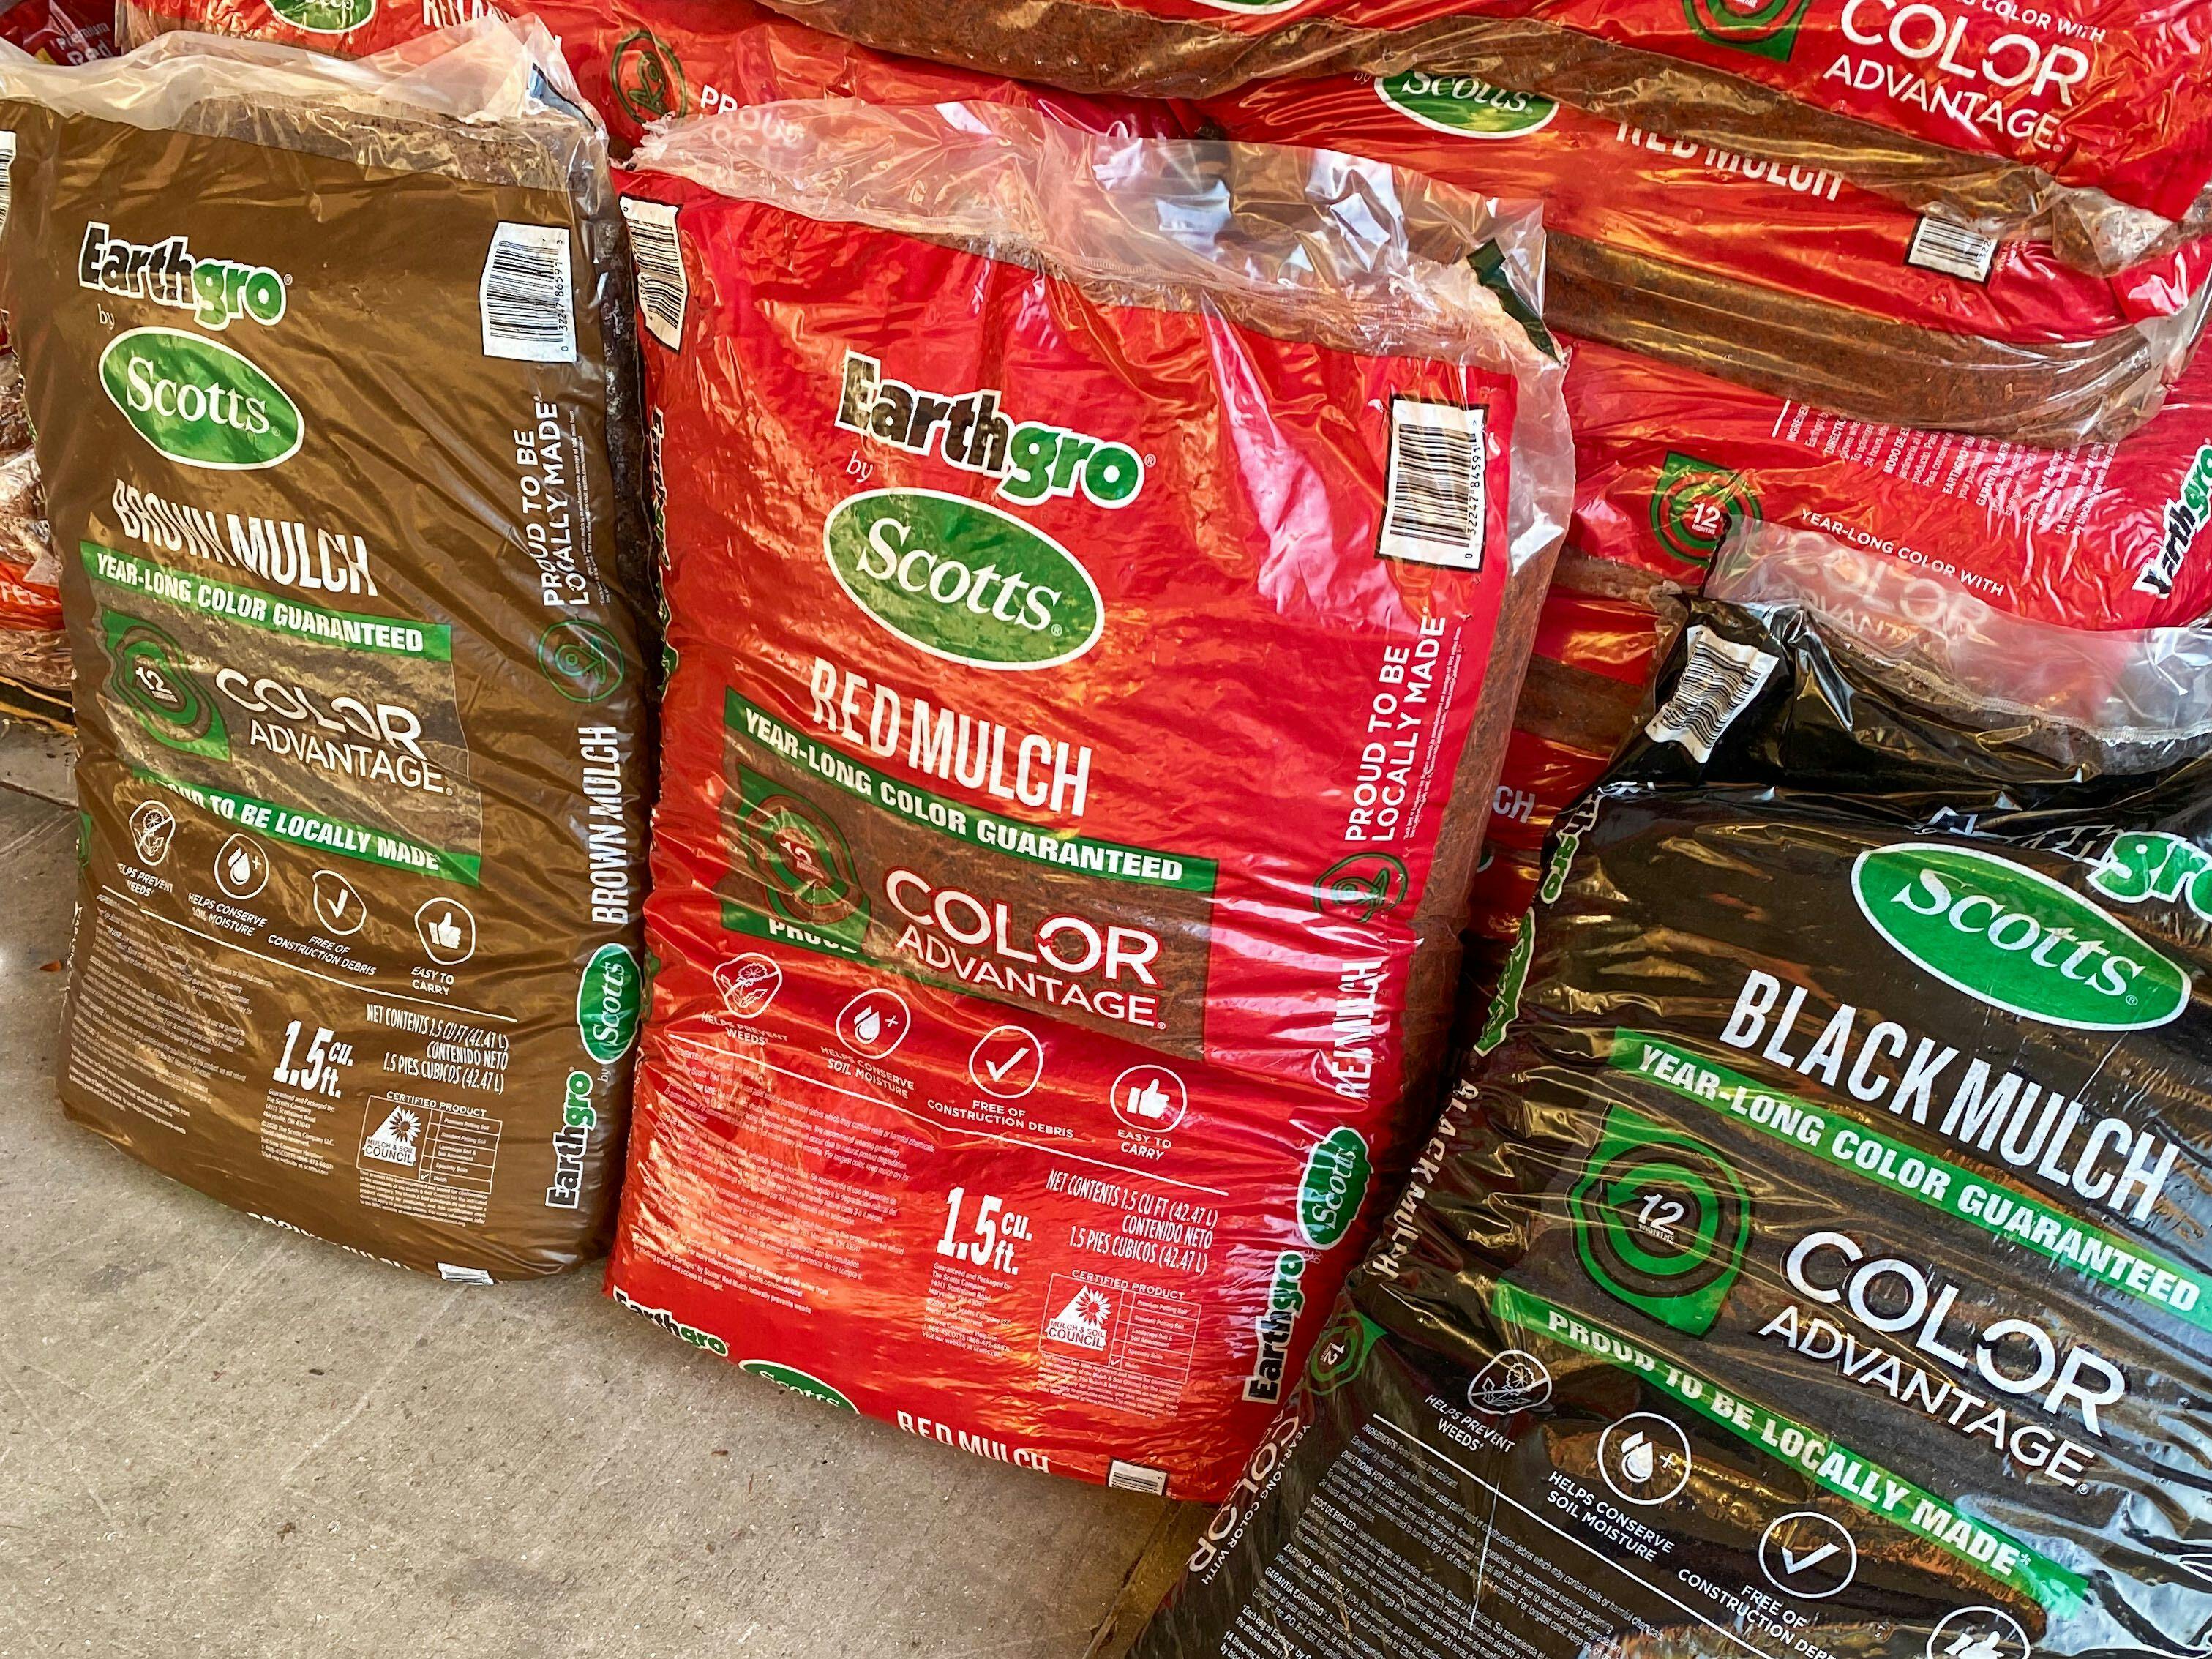 Three bags of earthgrow mulch at home depot, all of them are different colors - one brown, red, and black